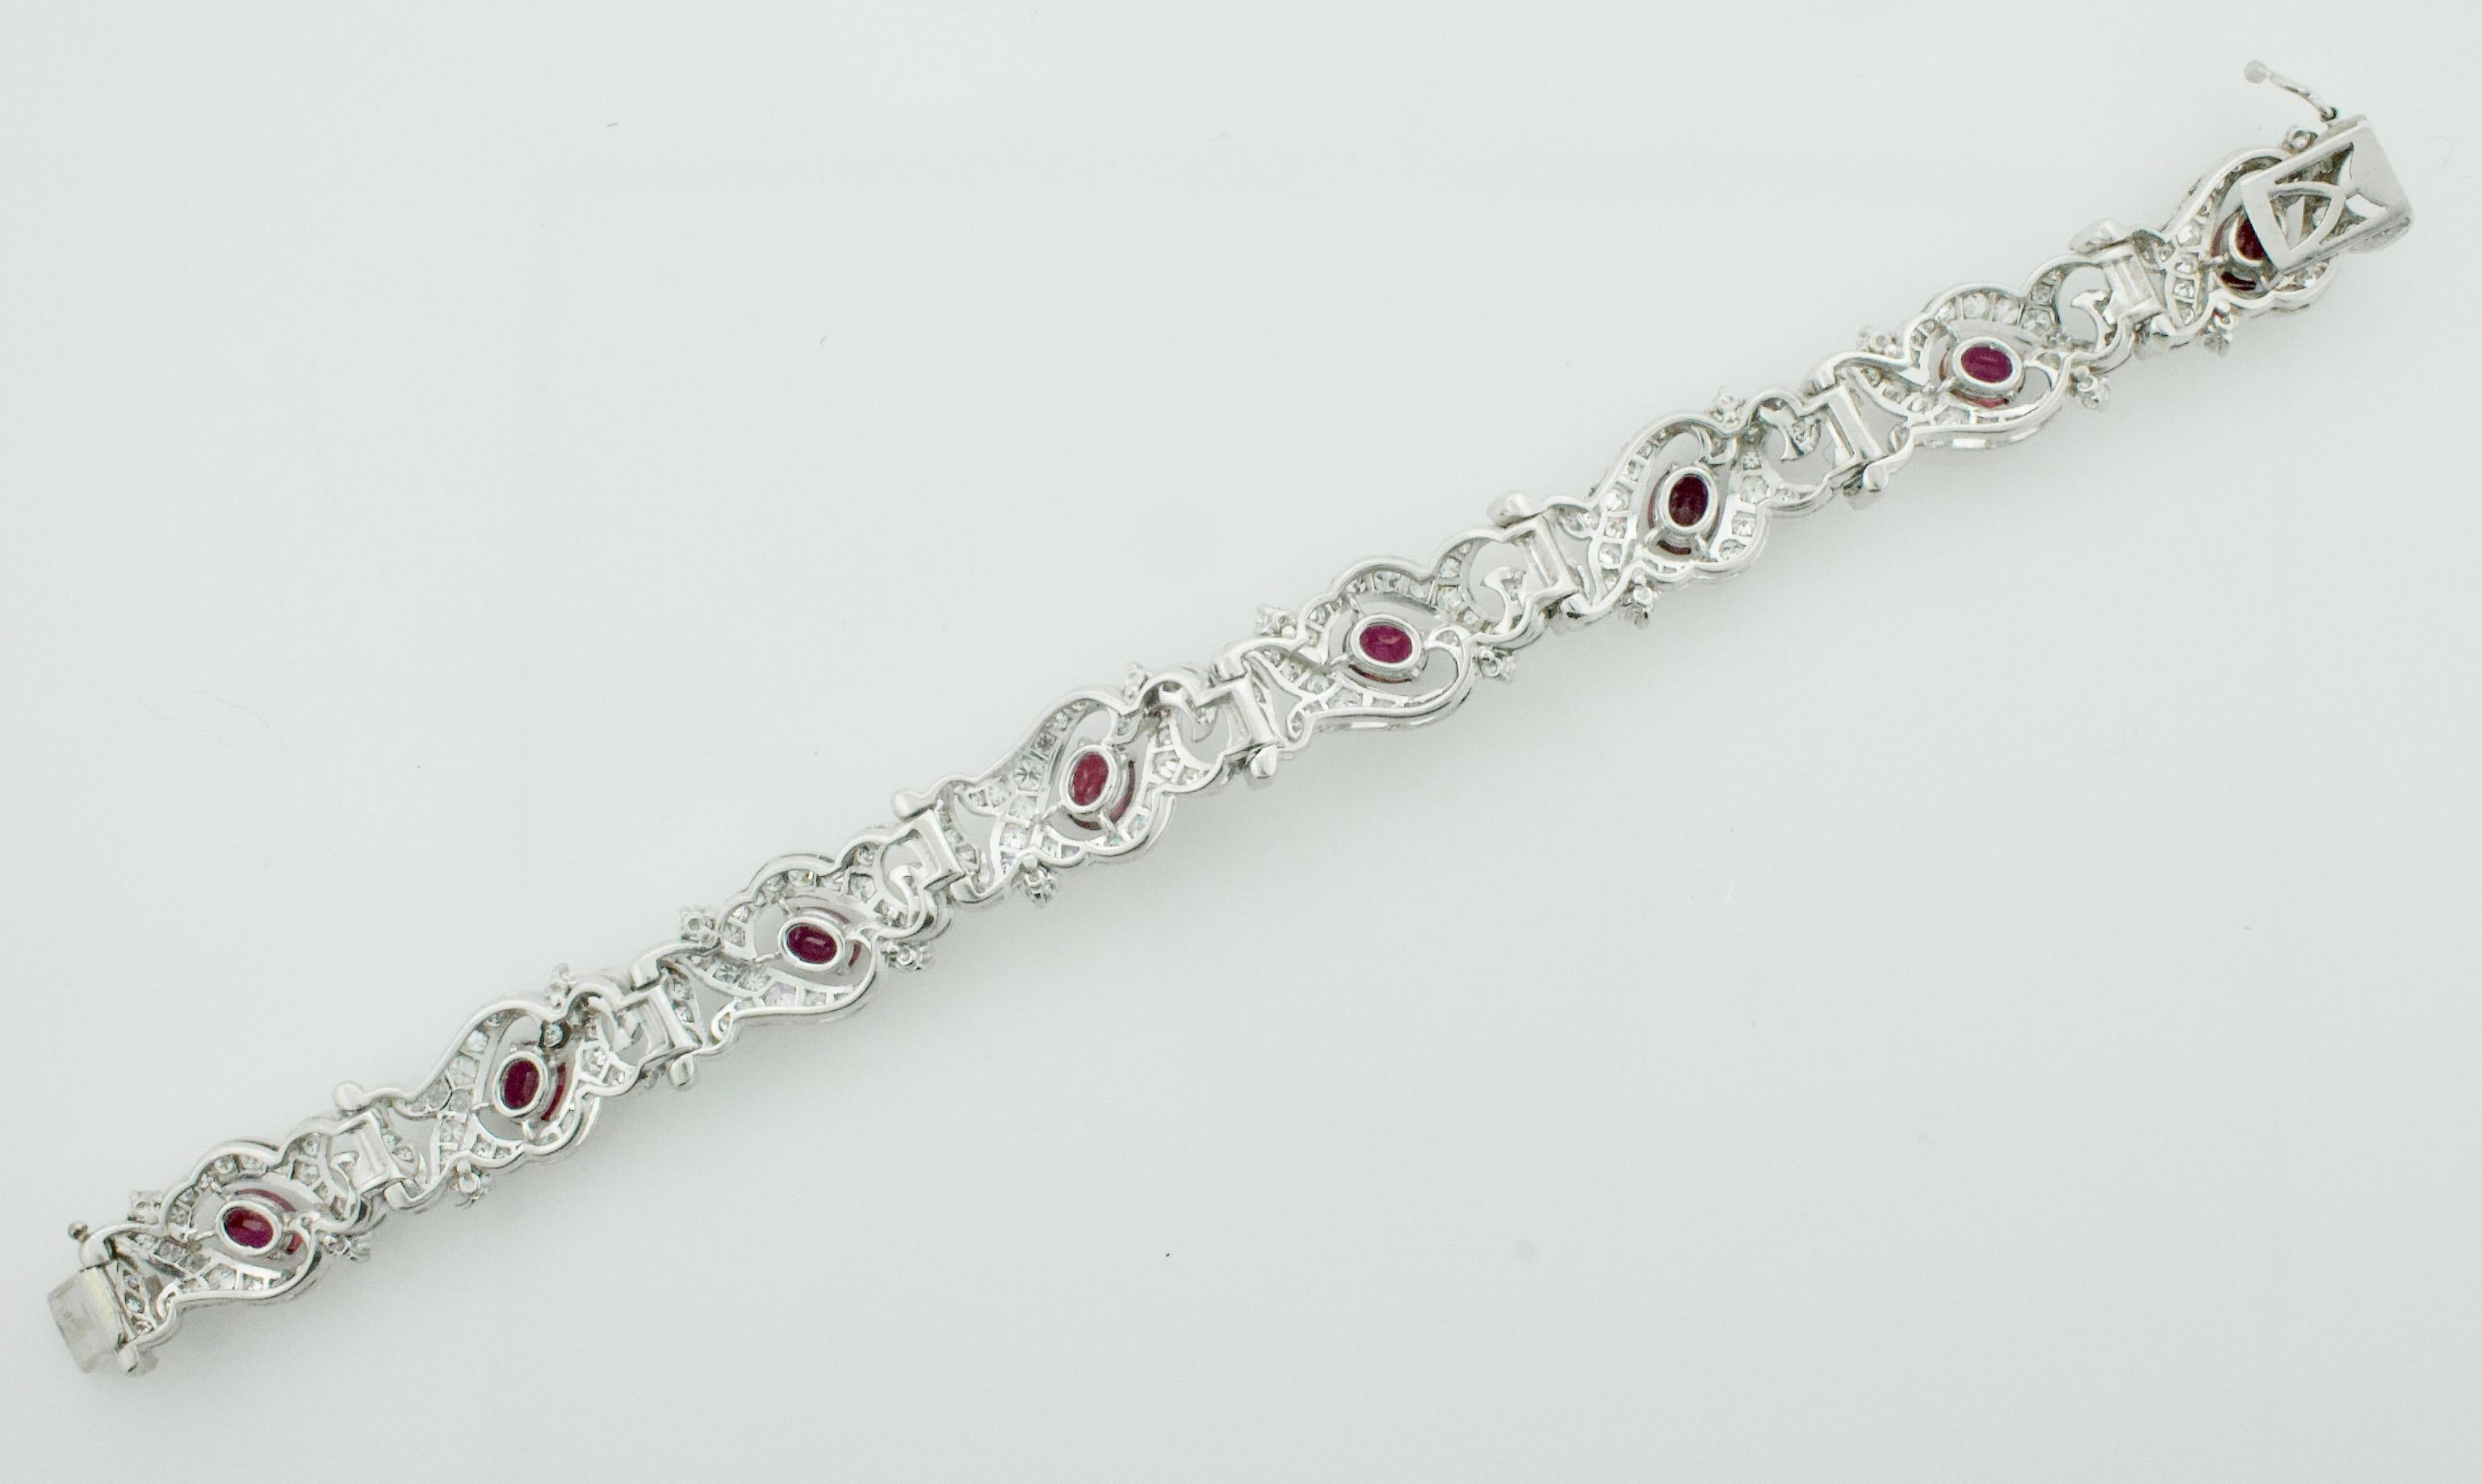 Outstanding Ruby and Diamond Bracelet Circa 1940's in Platinum
Eight Oval Rubies Weighing 6.50 Carats Approximately  [bright with no imperfections visible to the naked eye]
Two Hundred and Fifty Eight Round Cut Diamonds Weighing 7.00 Carats